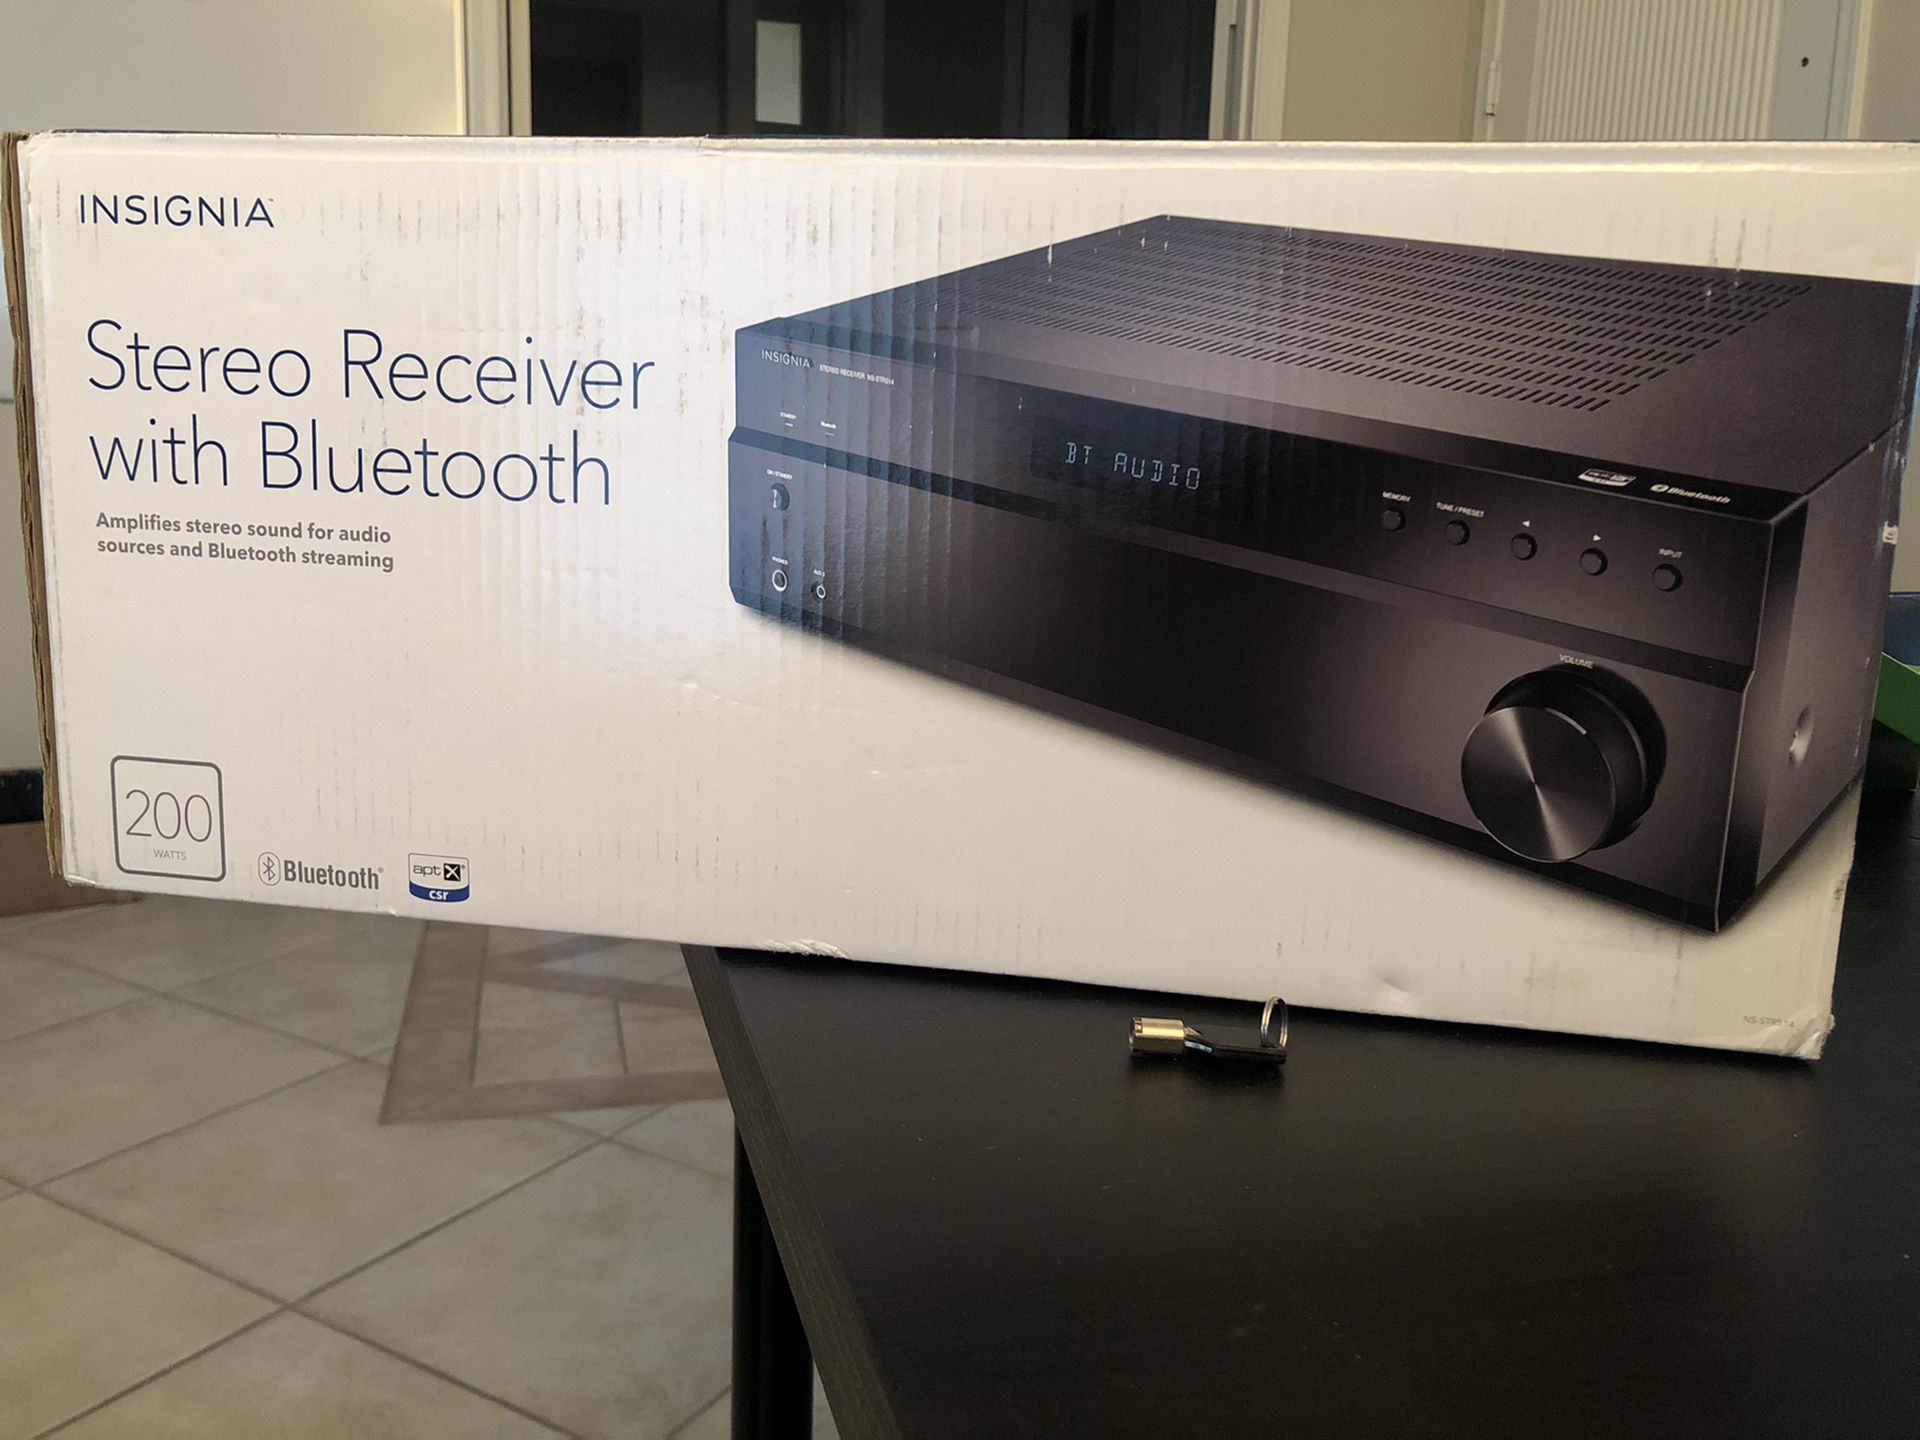 Insignia stereo receiver with Bluetooth